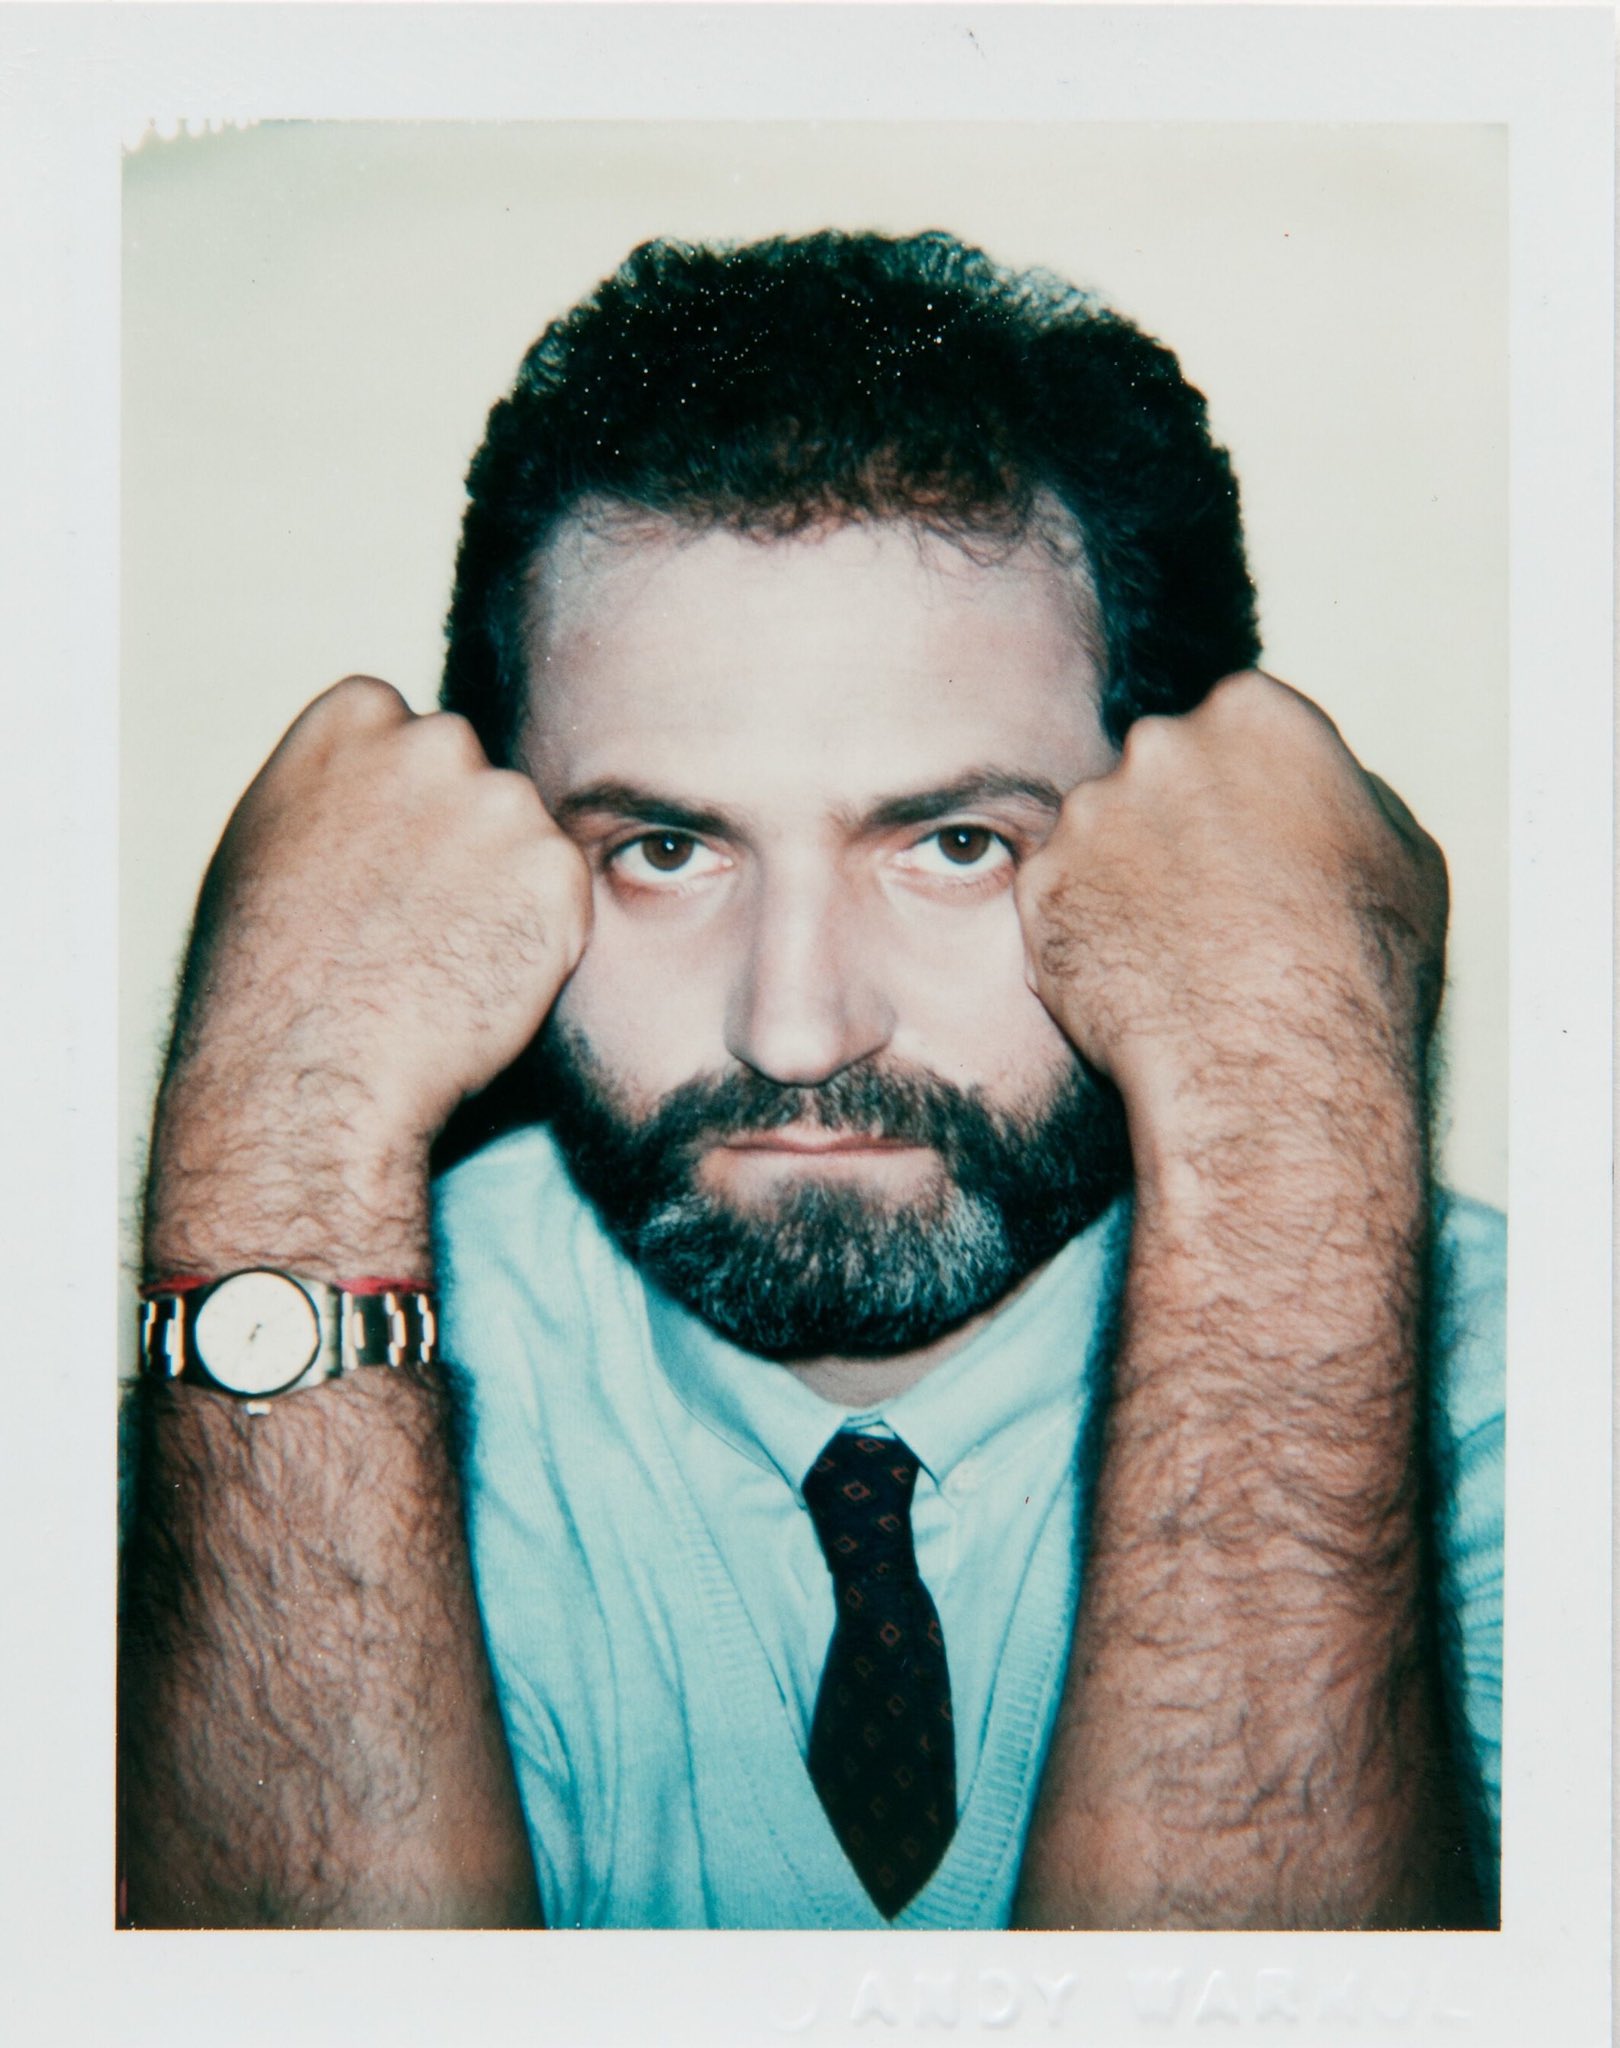 Happy birthday to the legend and a timeless inspiration in fashion, gianni versace 